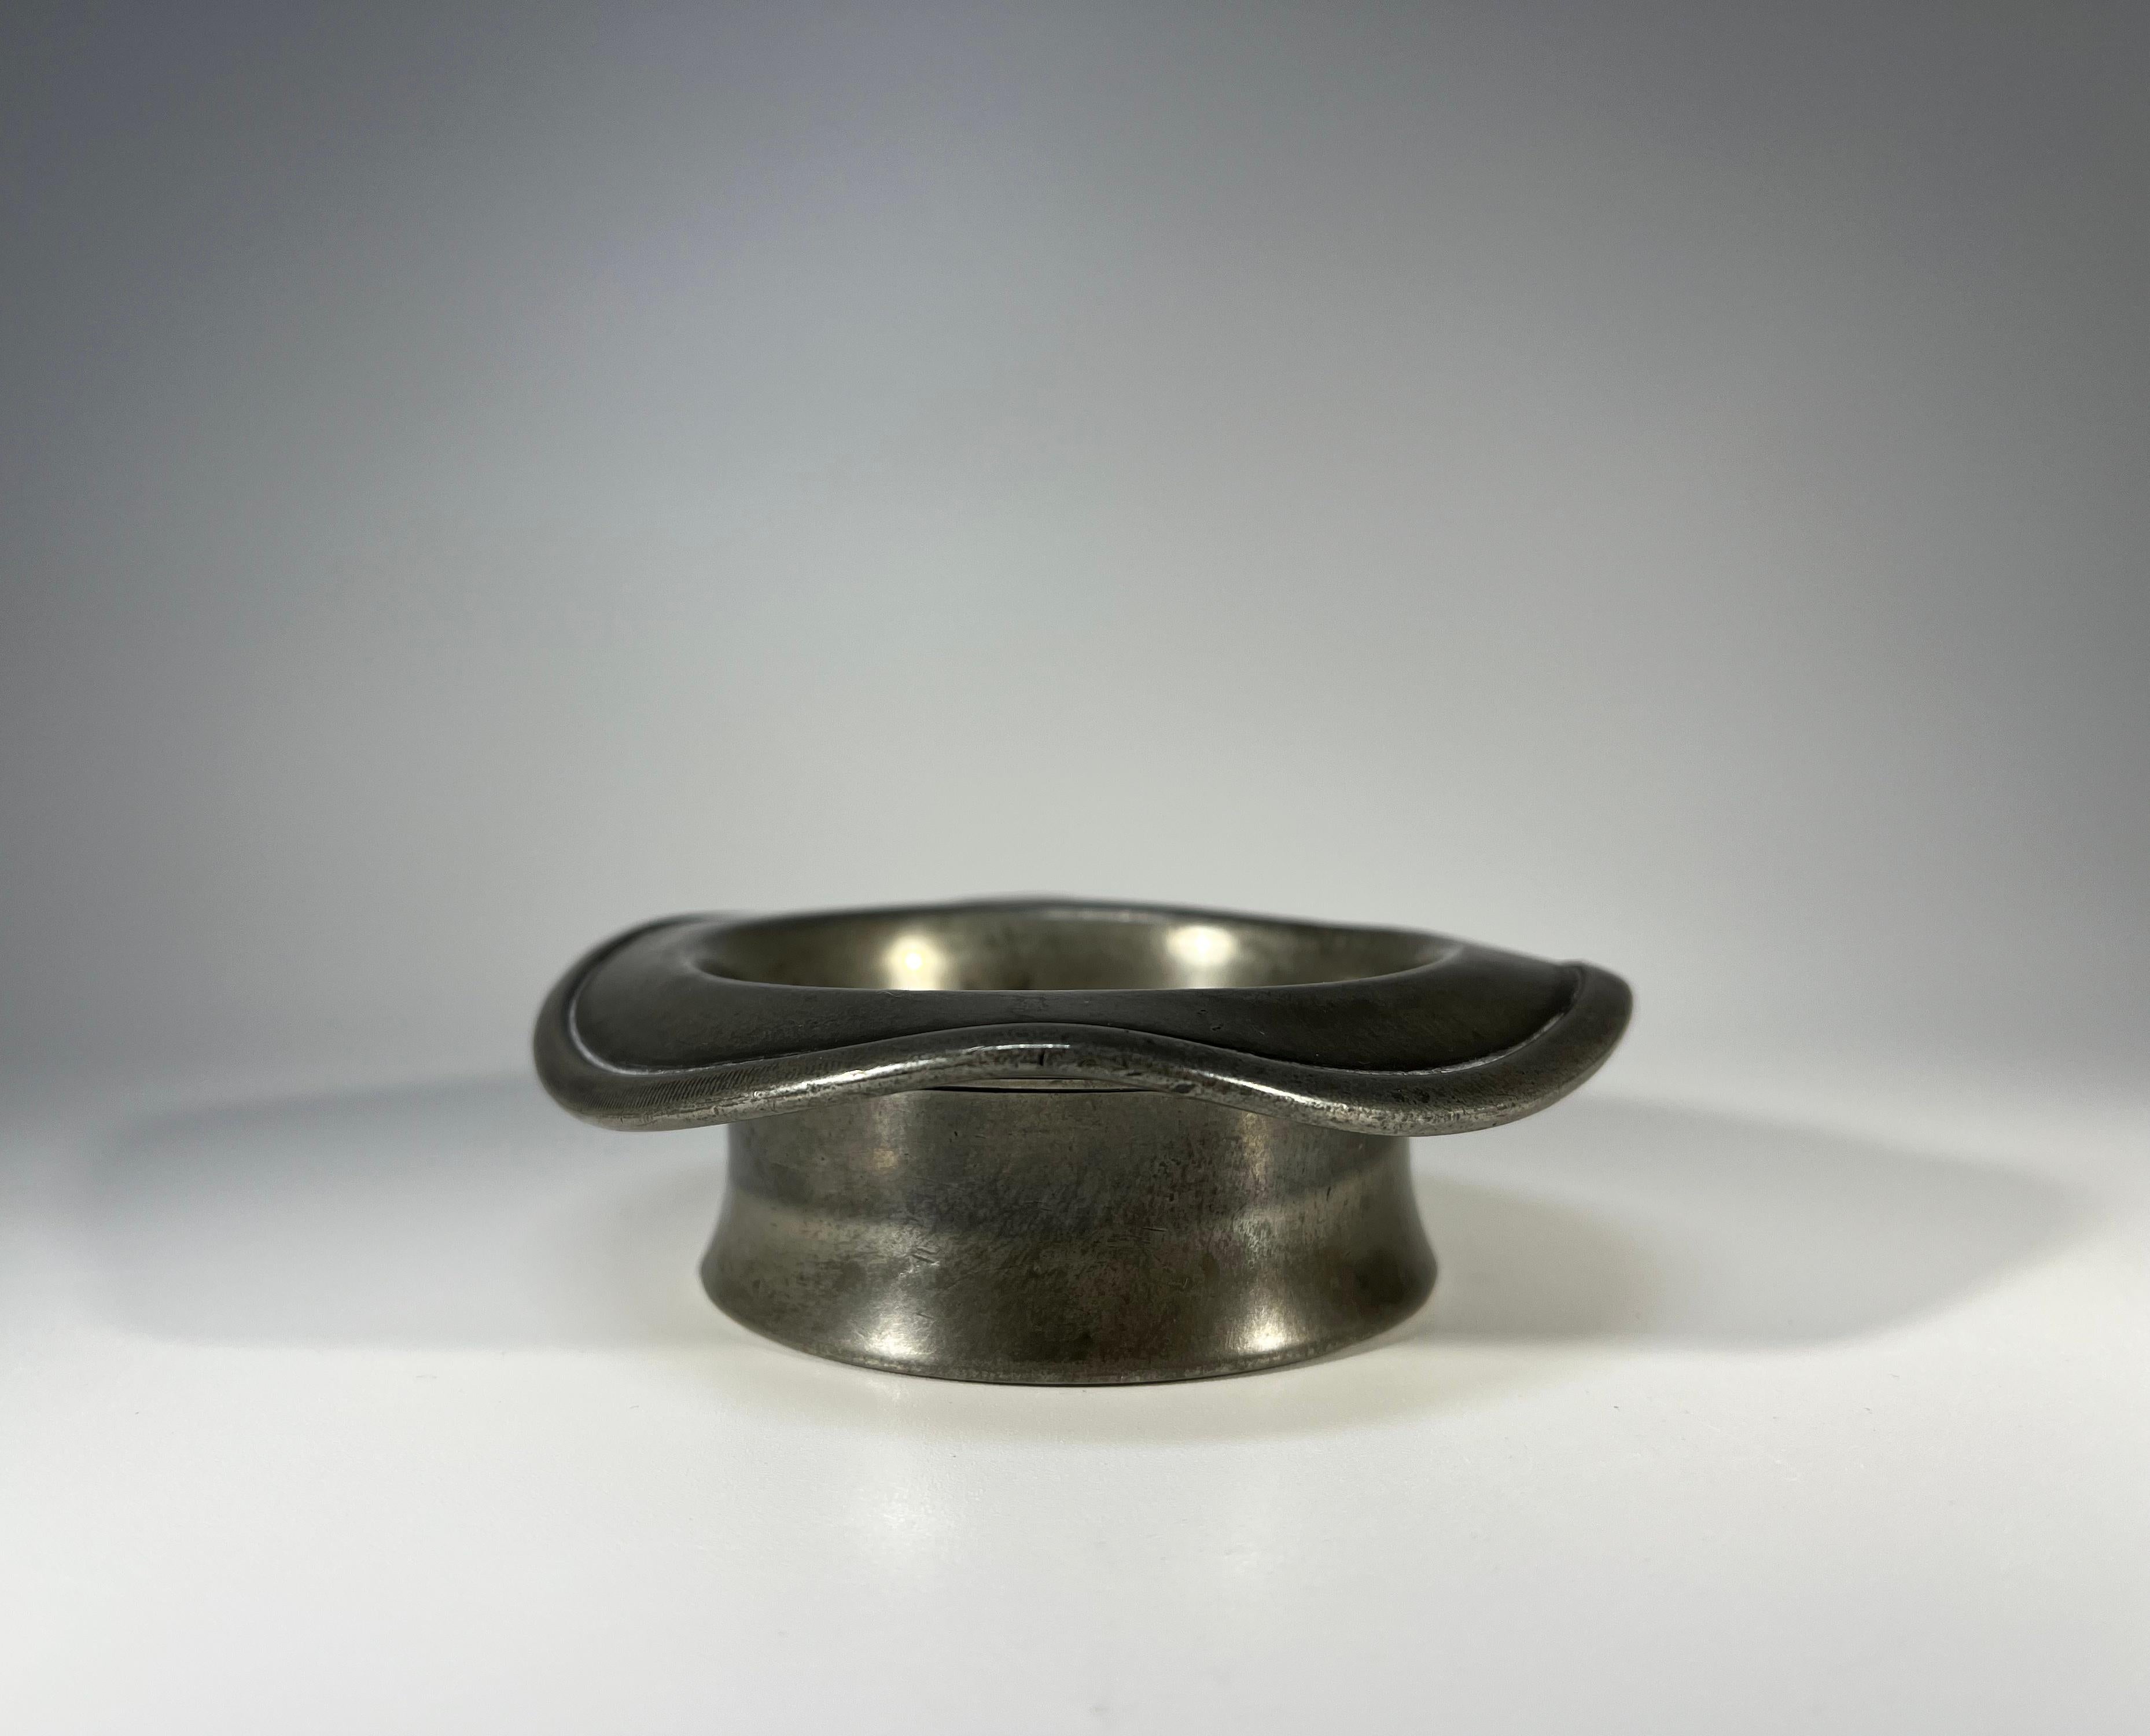 20th Century Victorian Pickwickian Hat, Pewter Paperweight Desk Ornament